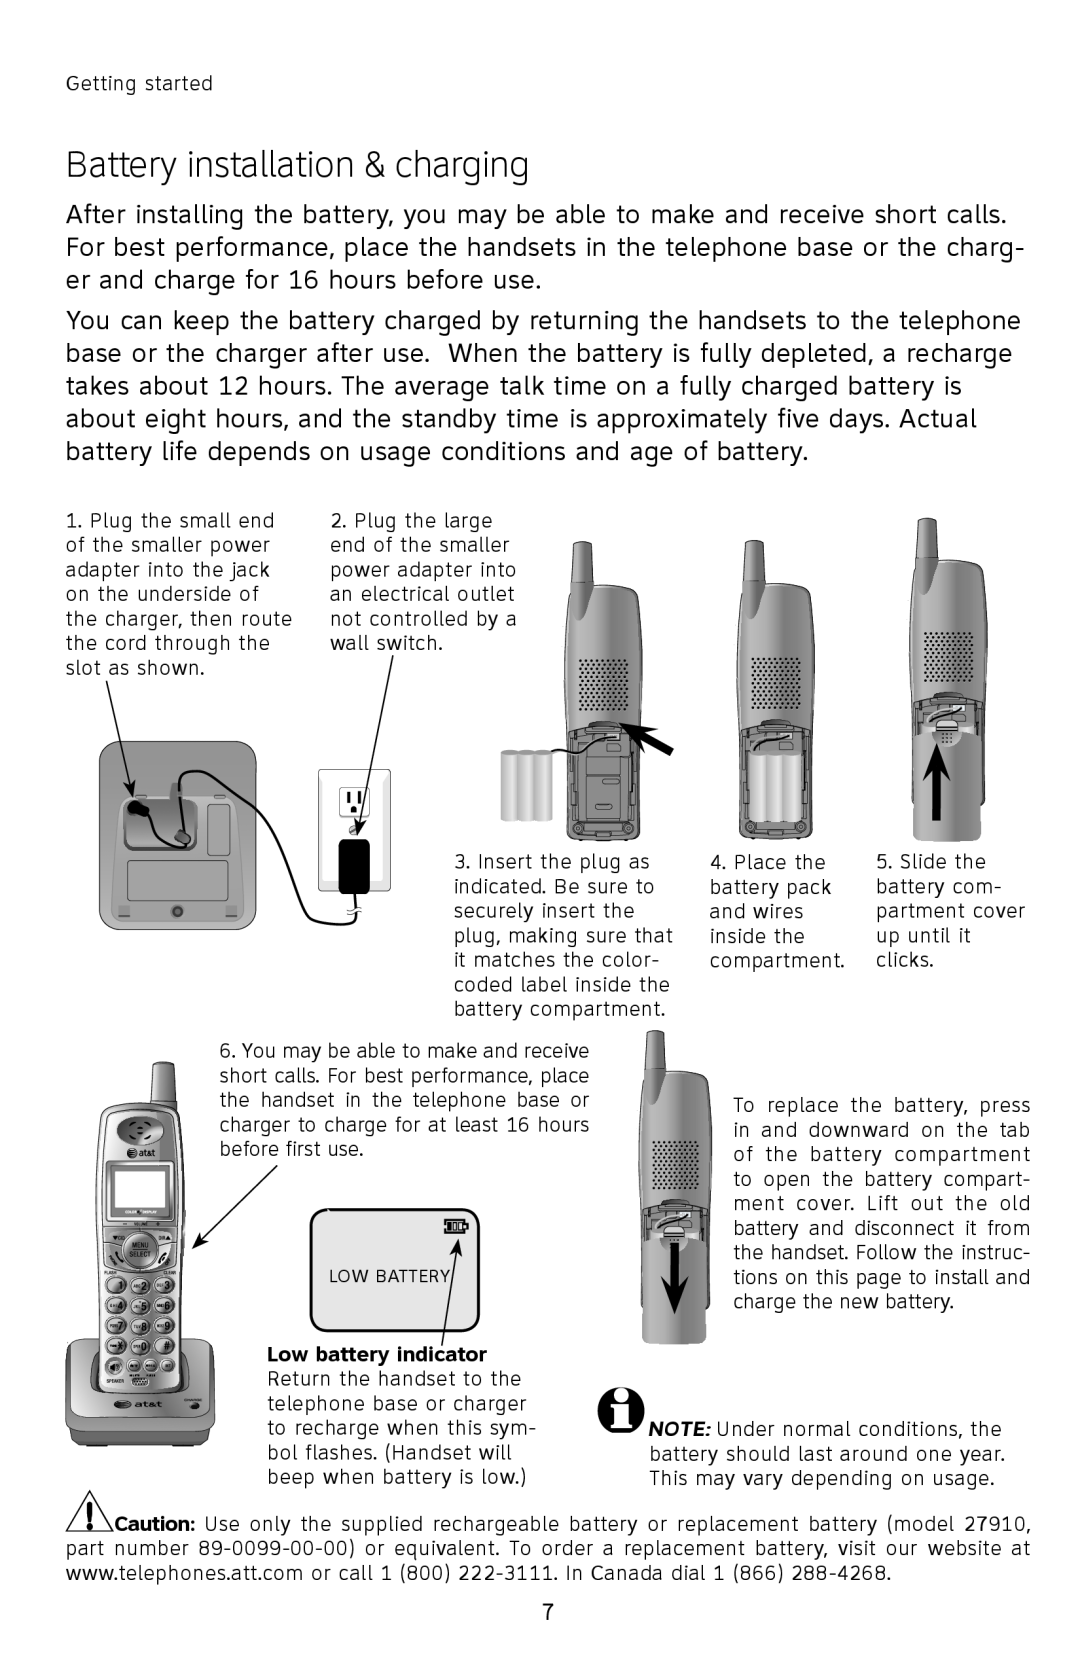 AT&T E2912 user manual Battery installation & charging, Low battery indicator 